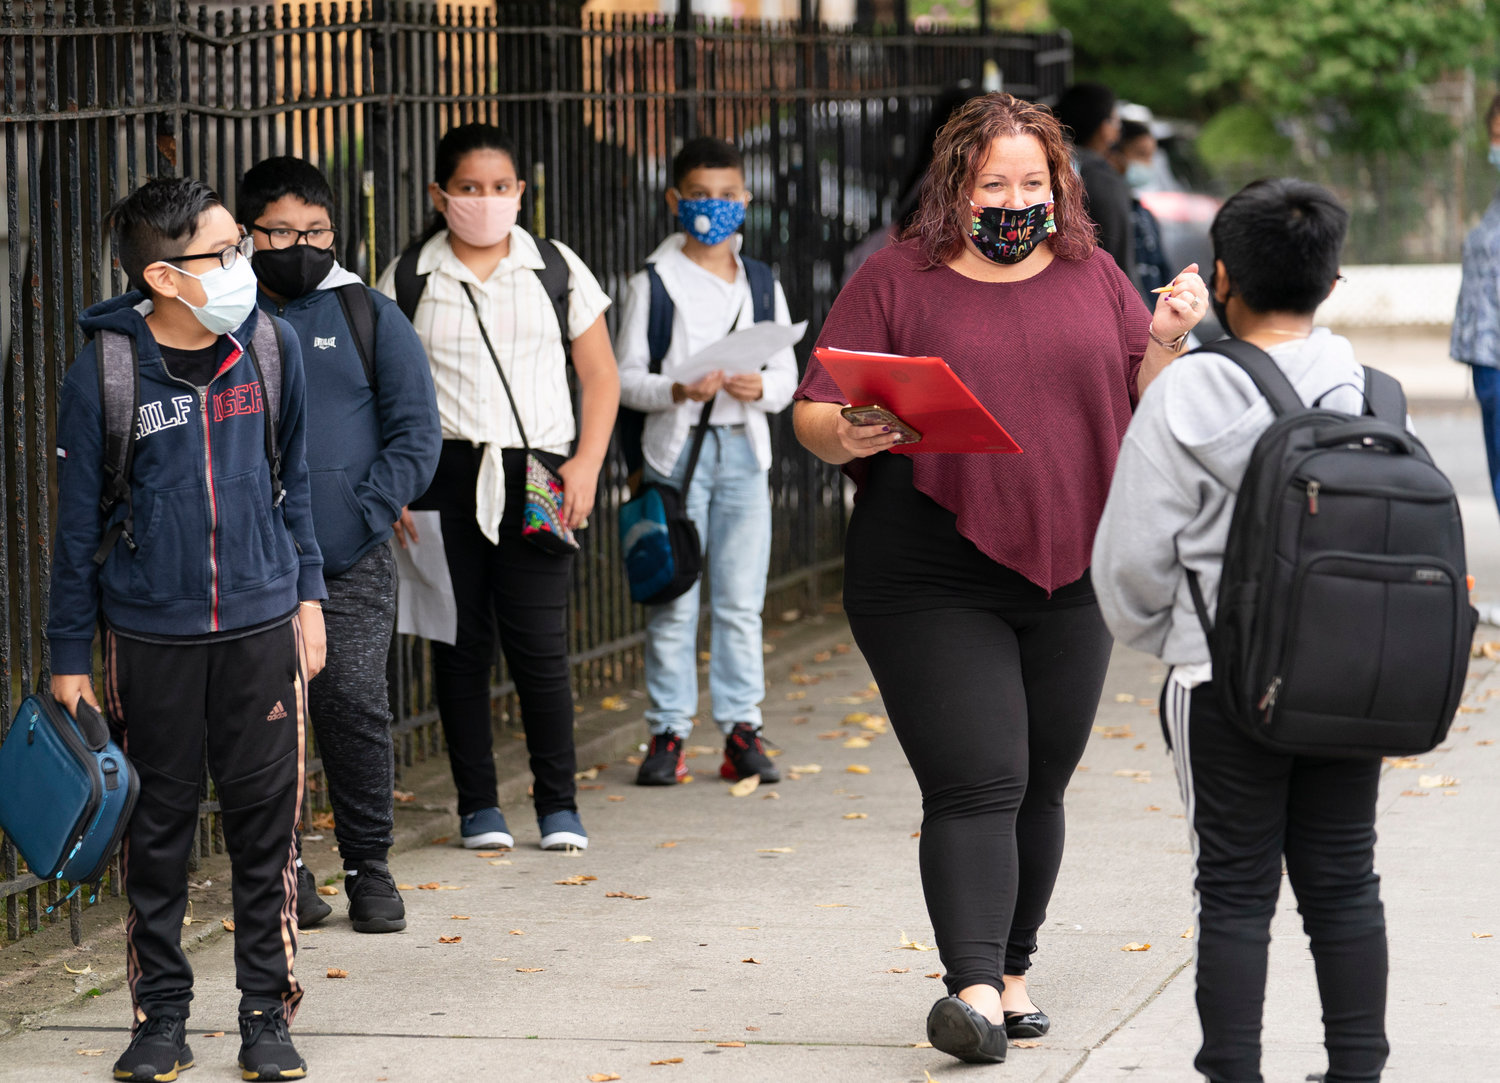 A teacher at PS 179 in Brooklyn greets students returning to school for blended-learning in September 2020. The 82 Department of Education staffers accused of submitting phony Covid vaccination cards will be placed back on payroll this fall.